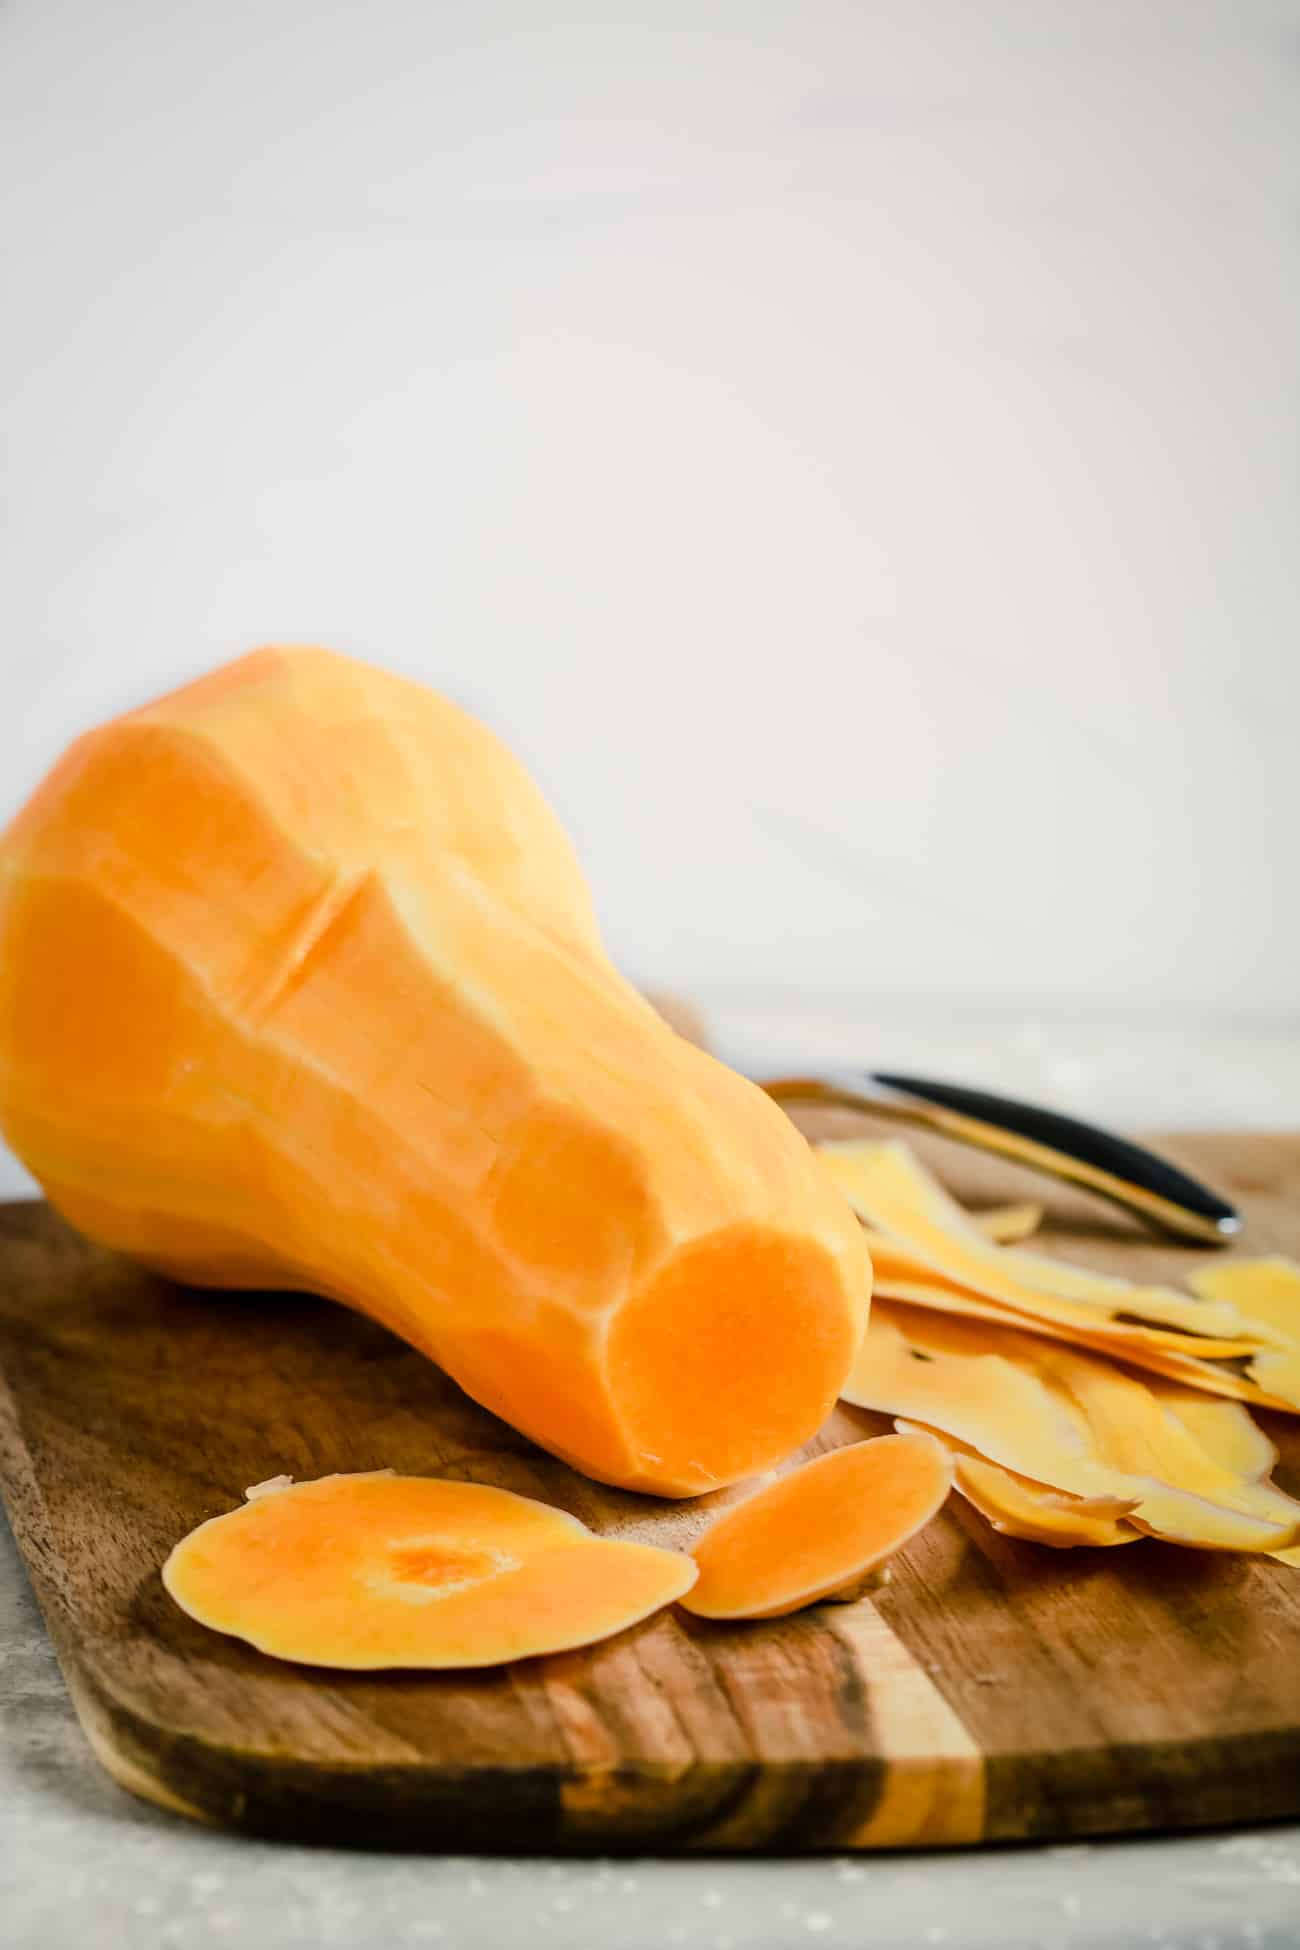 HOW TO PEEL BUTTERNUT SQUASH